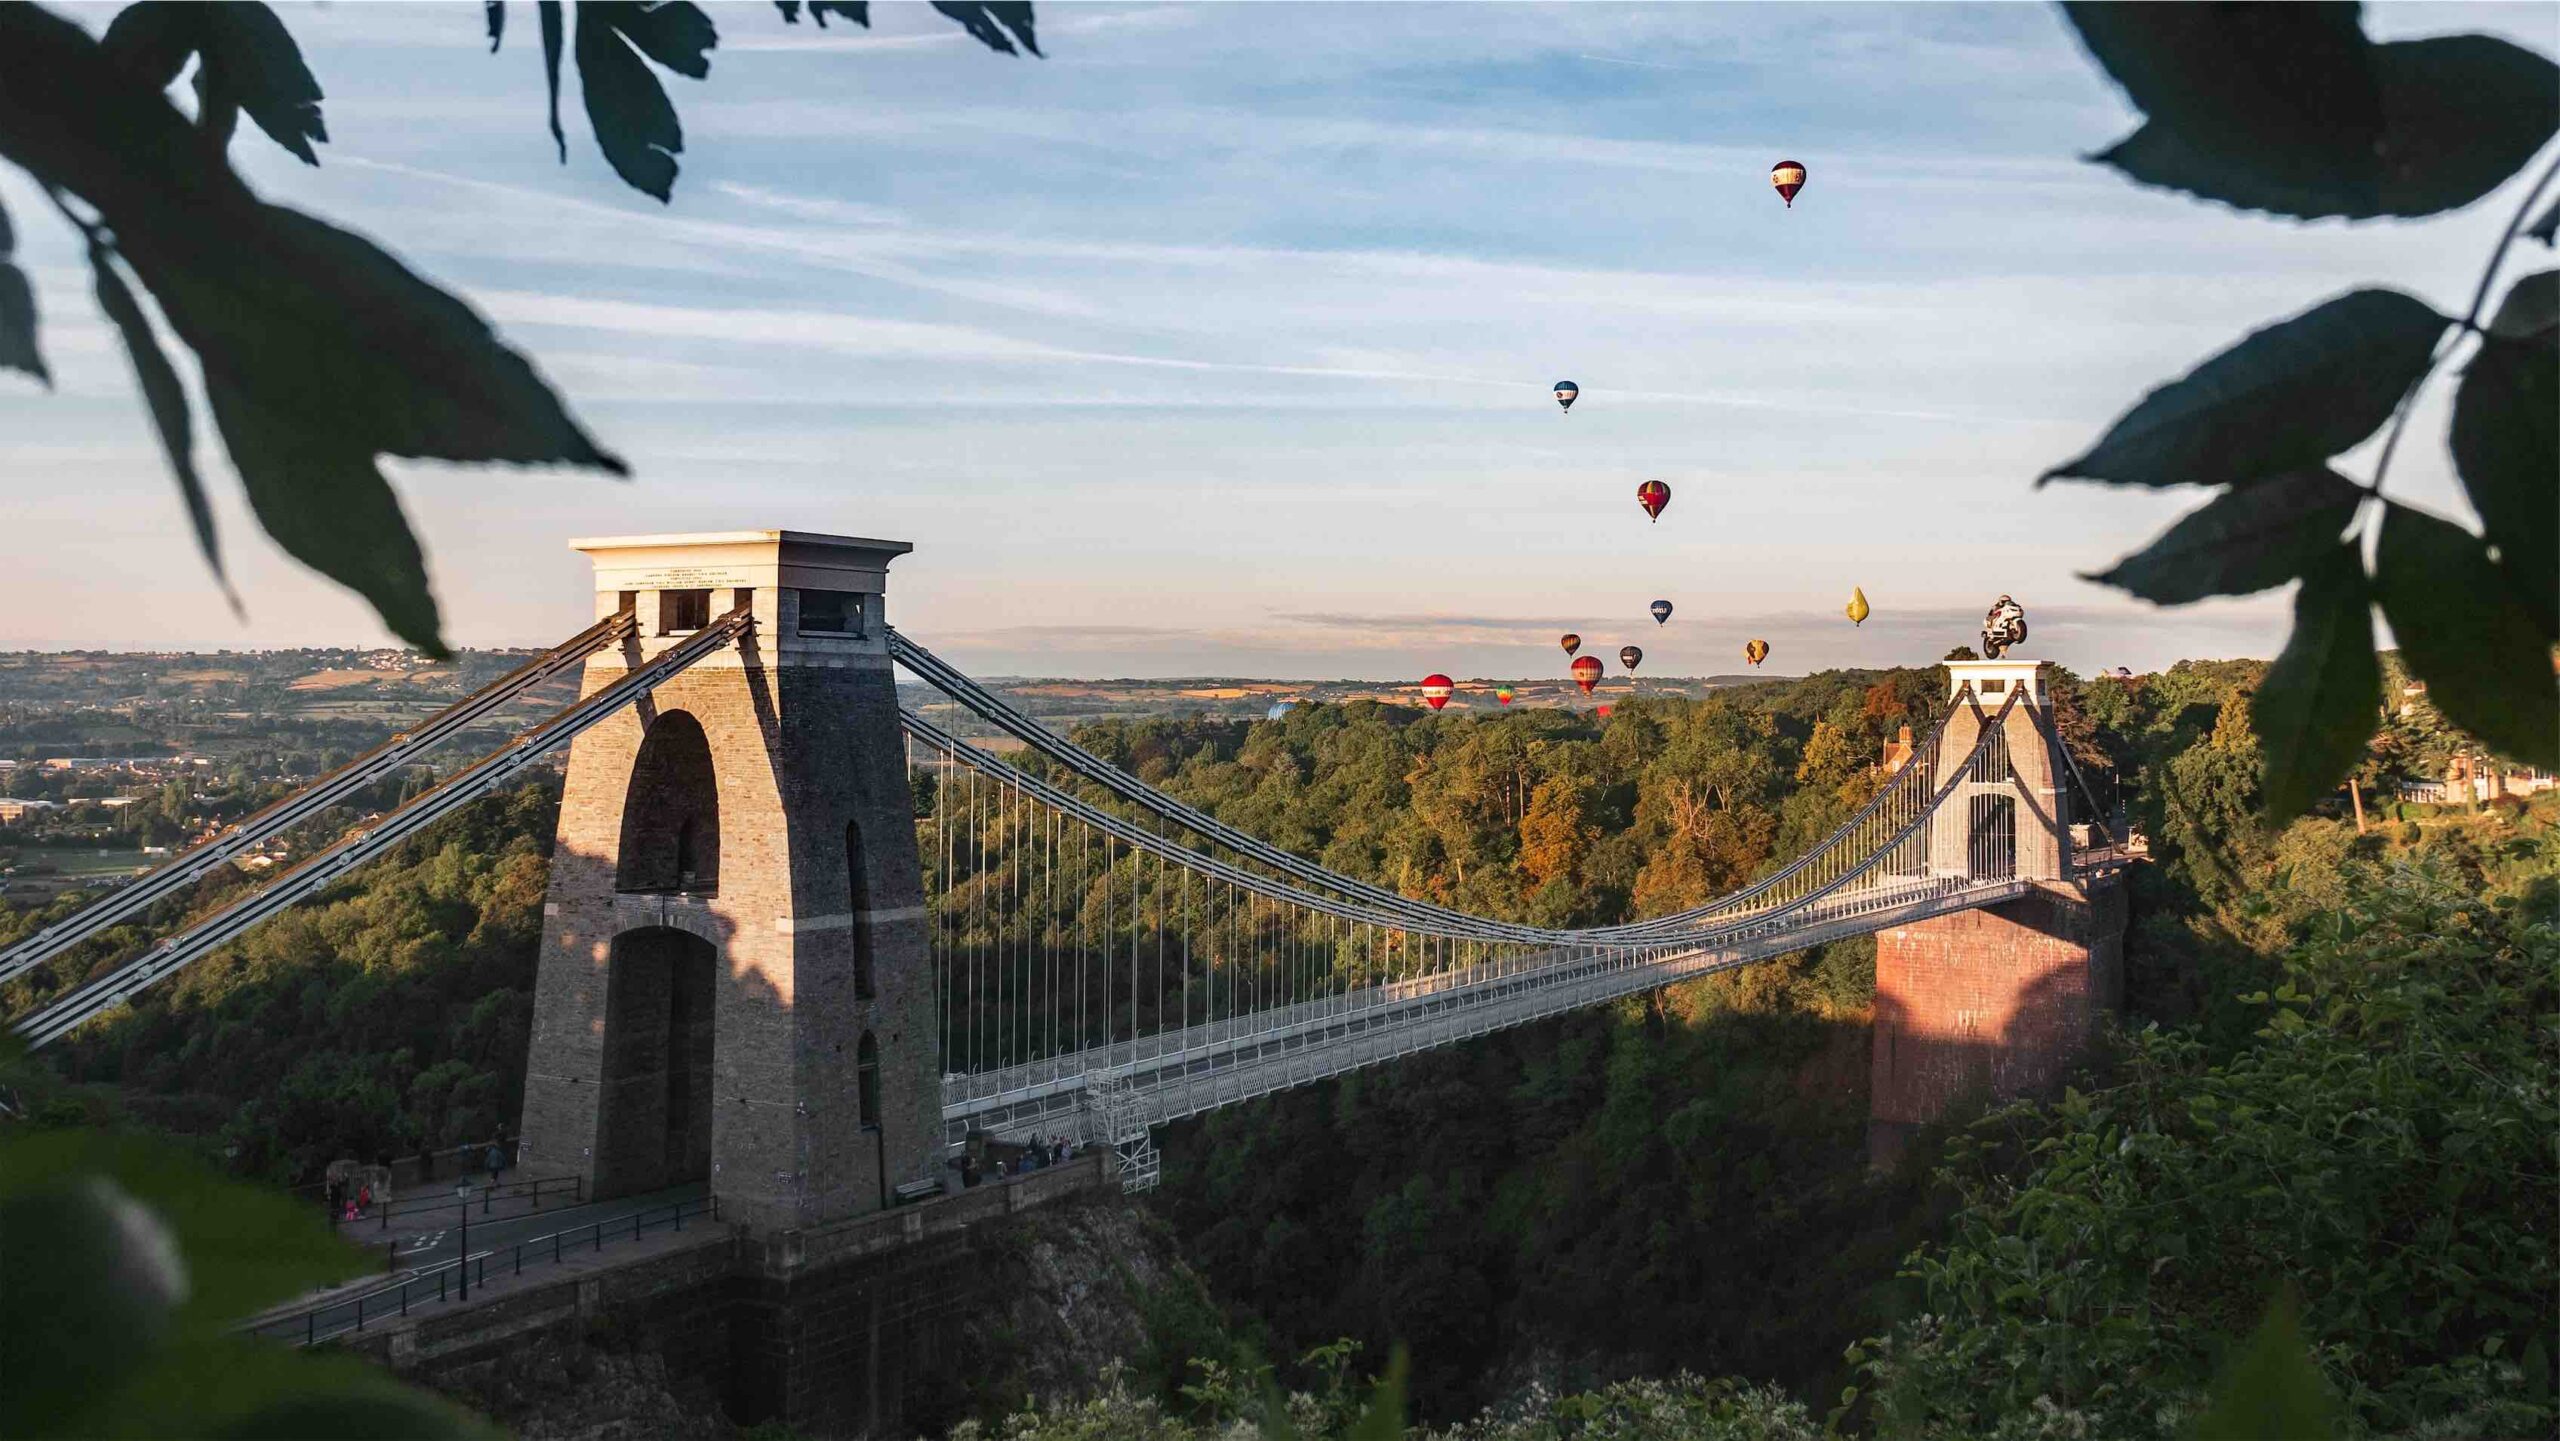 Clifton suspension bridge at sunset with air balloons in the sky above.